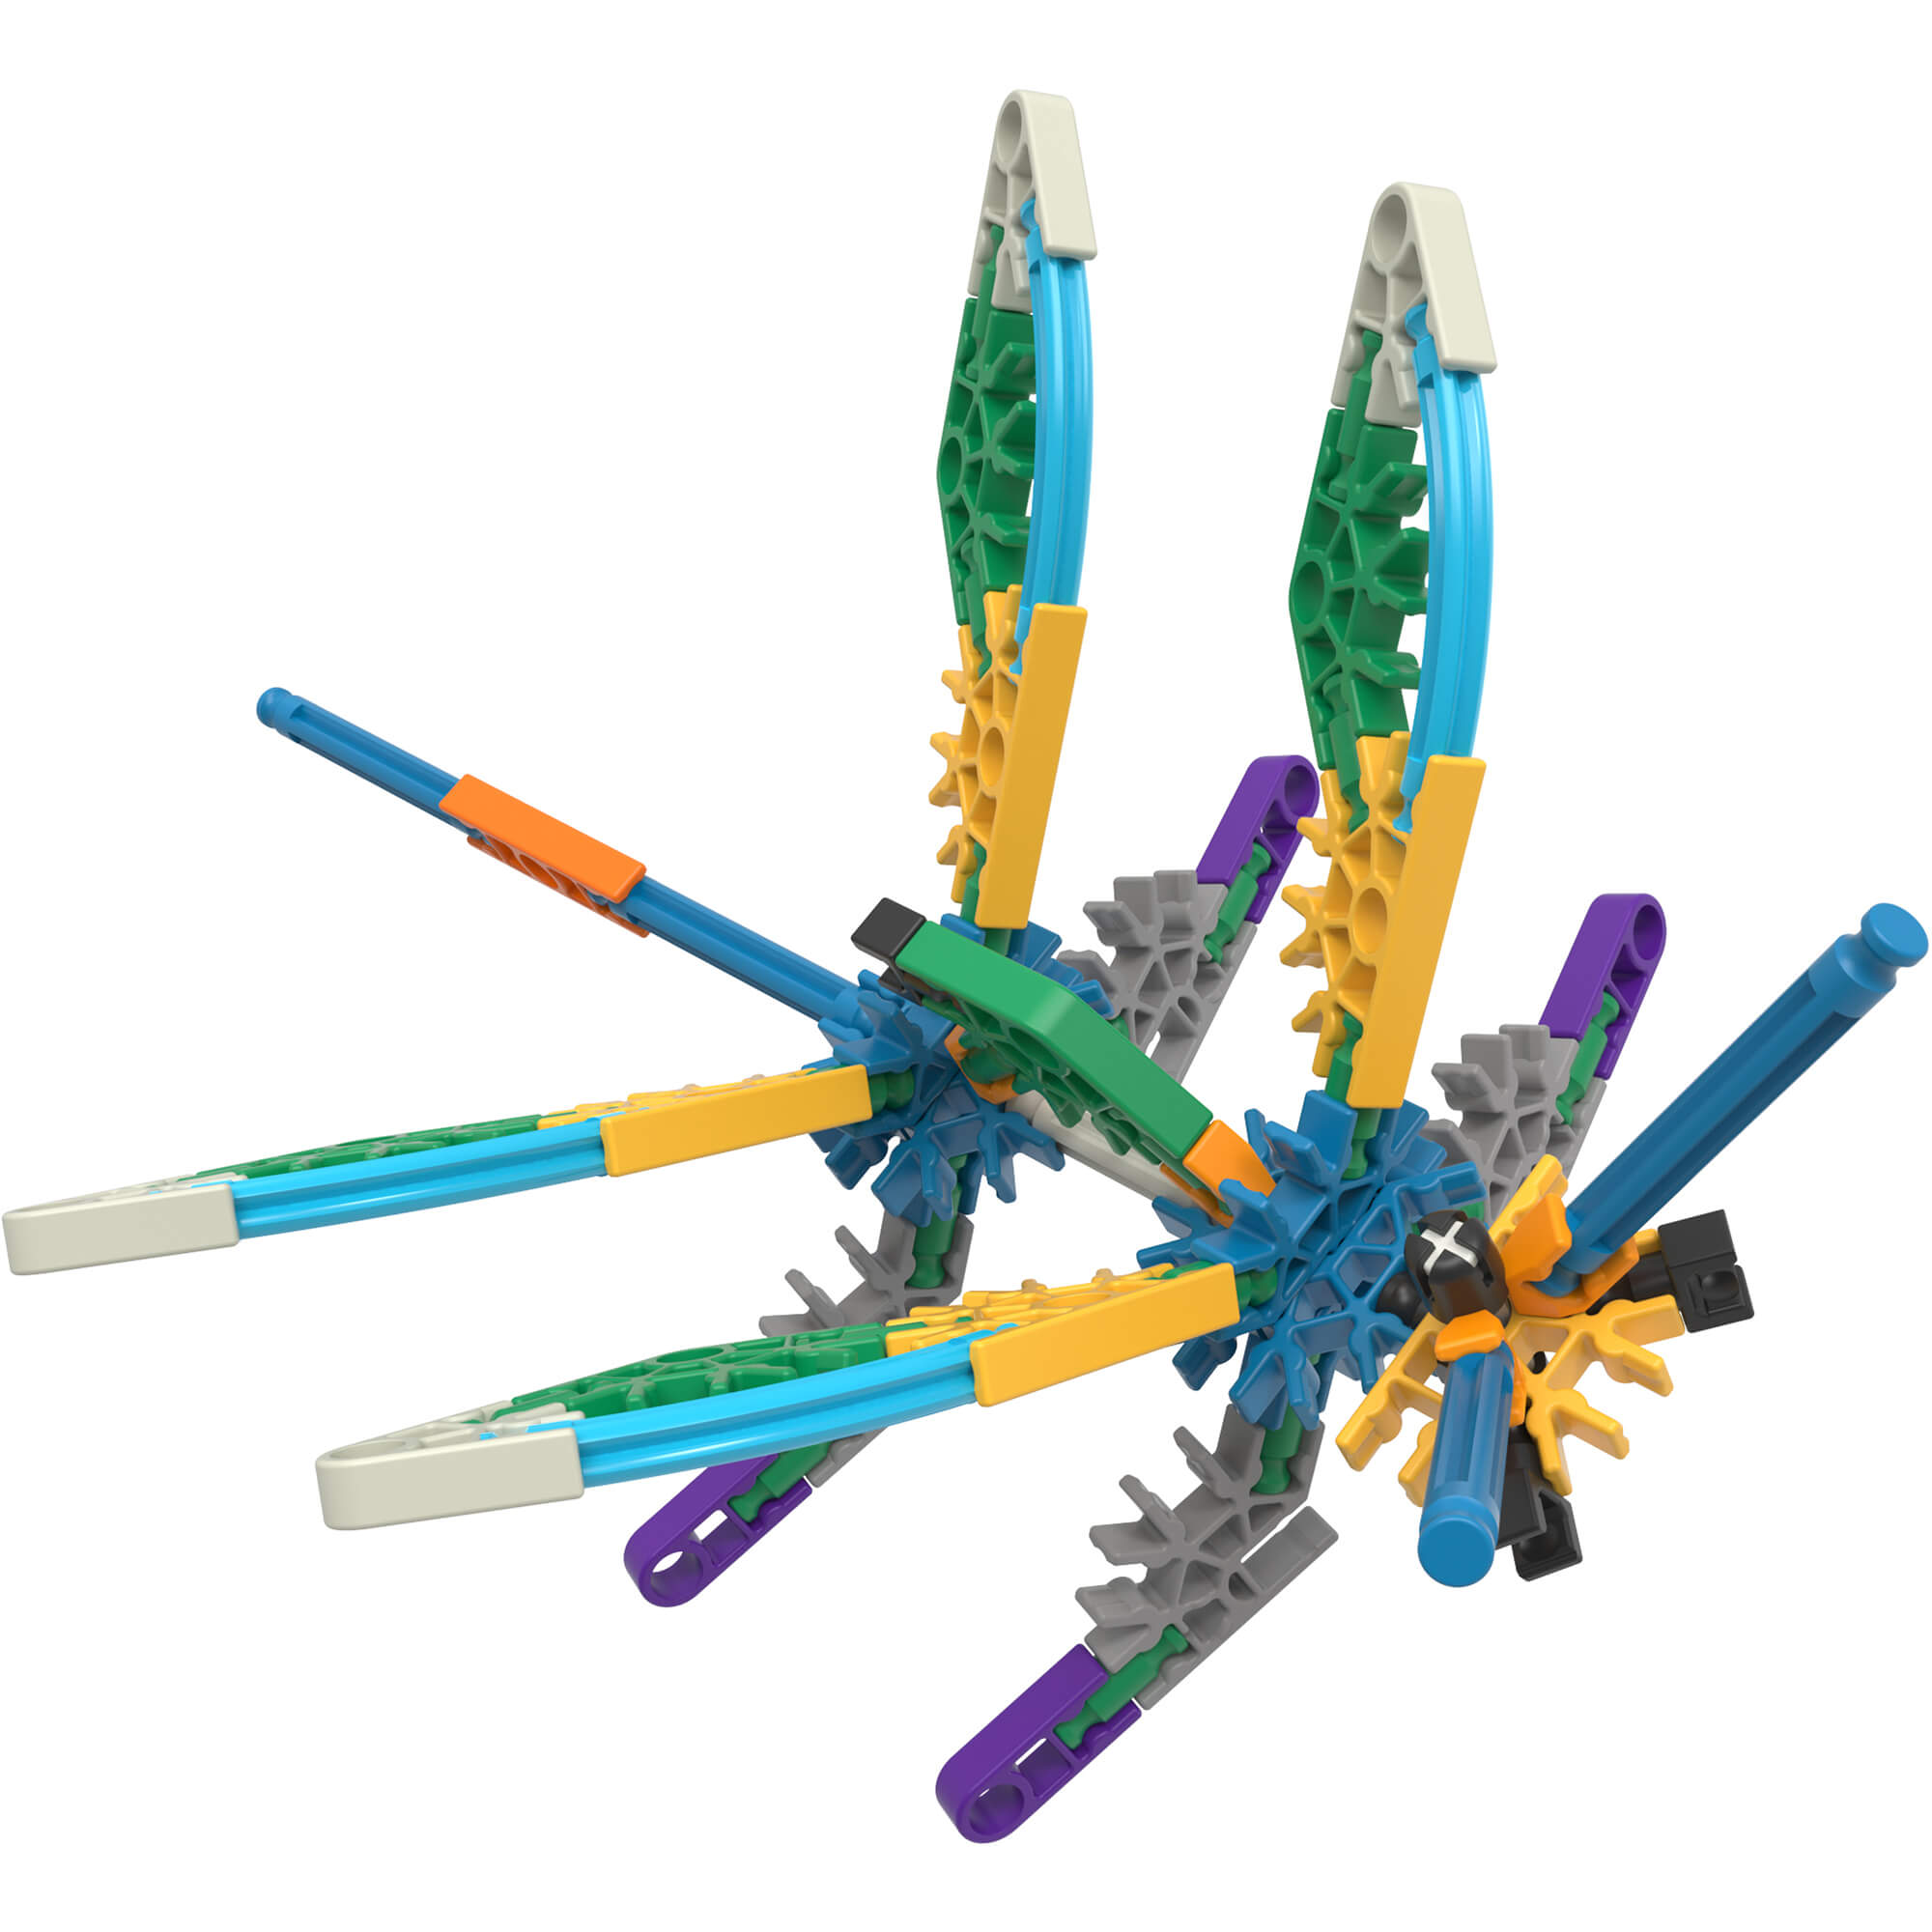 Side view of the k'nex helicopter.